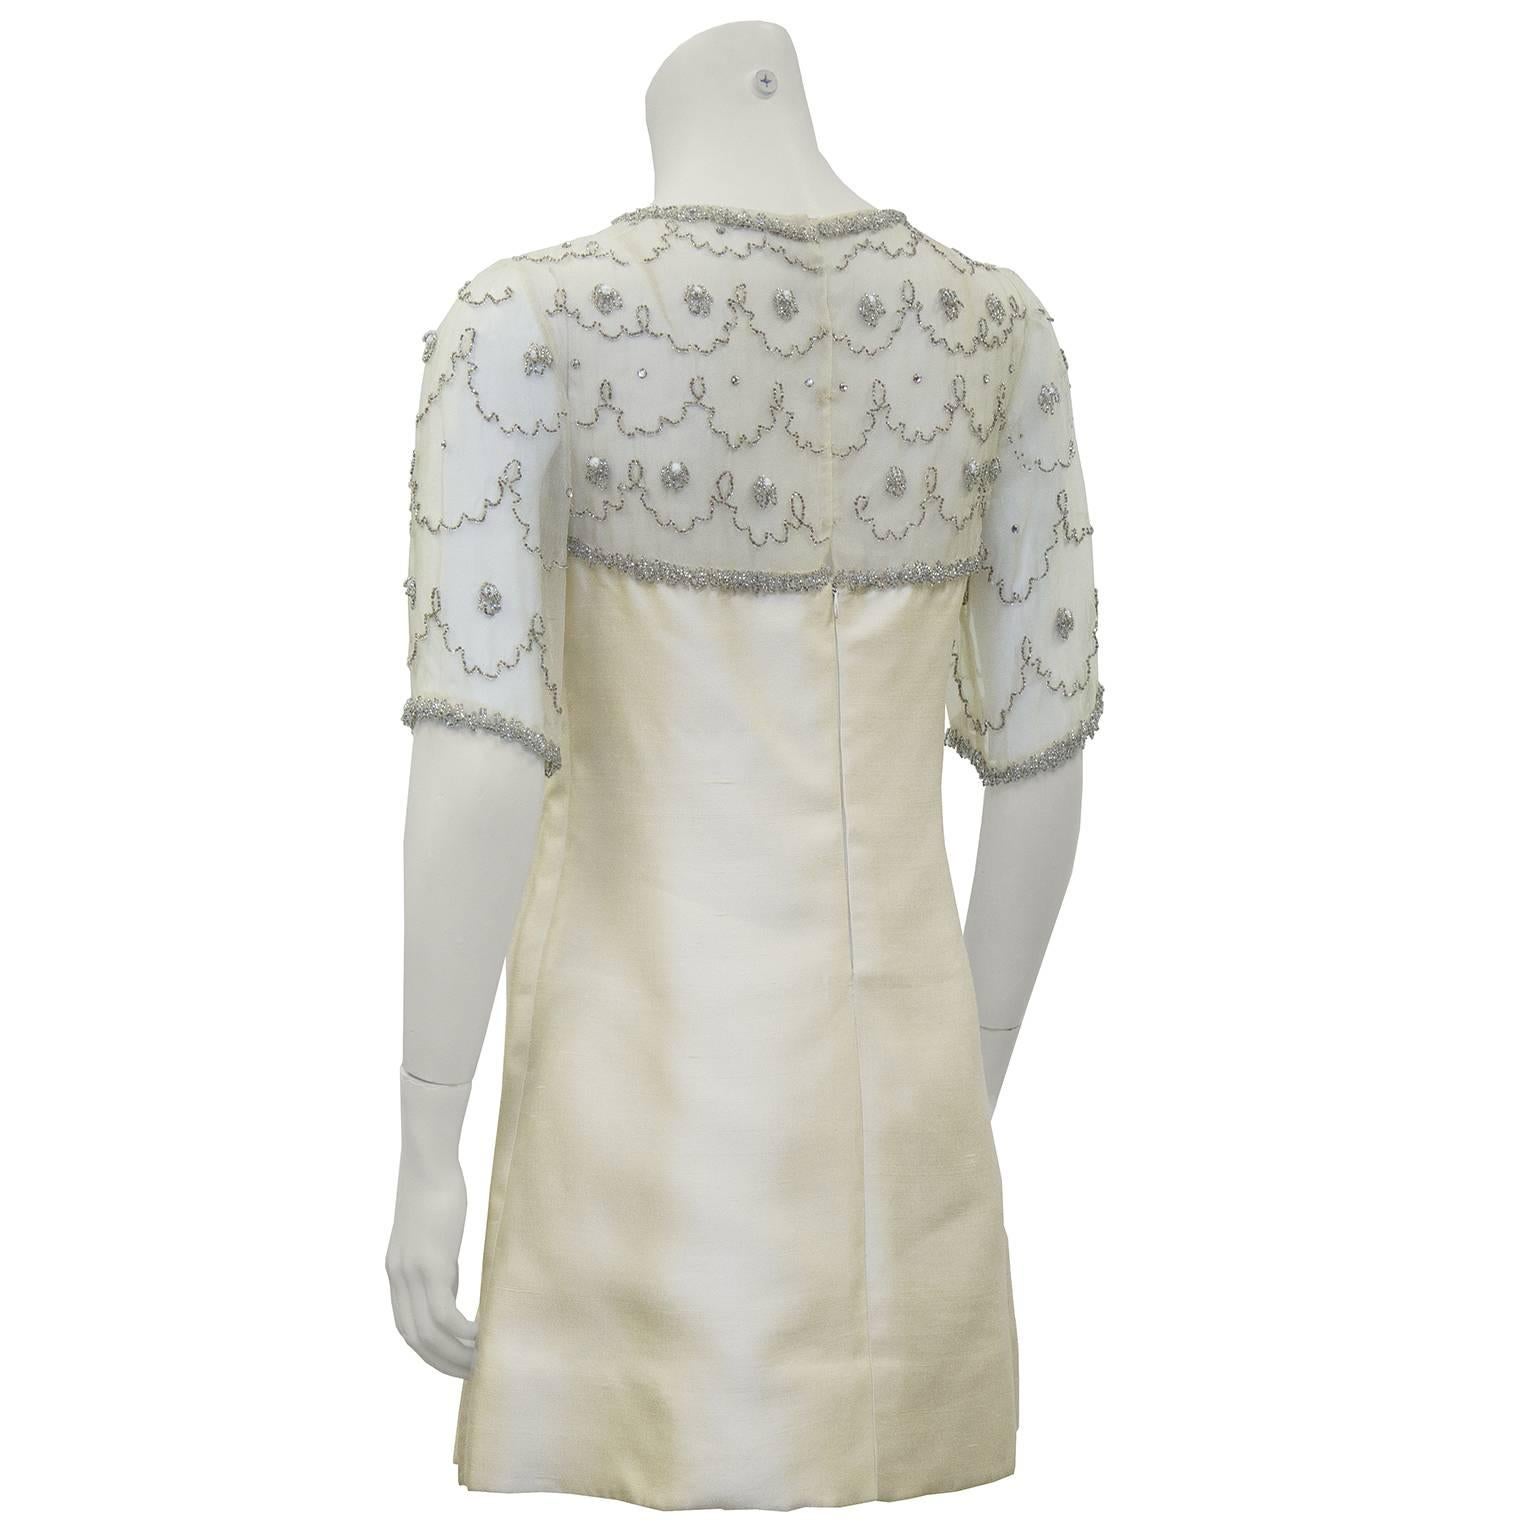 Adorable 1960's cream mini dress with beaded top panel. The round neckline and short sleeves are sheer and beaded all over with small silver beads in a scallop and flower pattern. Silk shantung bodice with seams down the front. In excellent